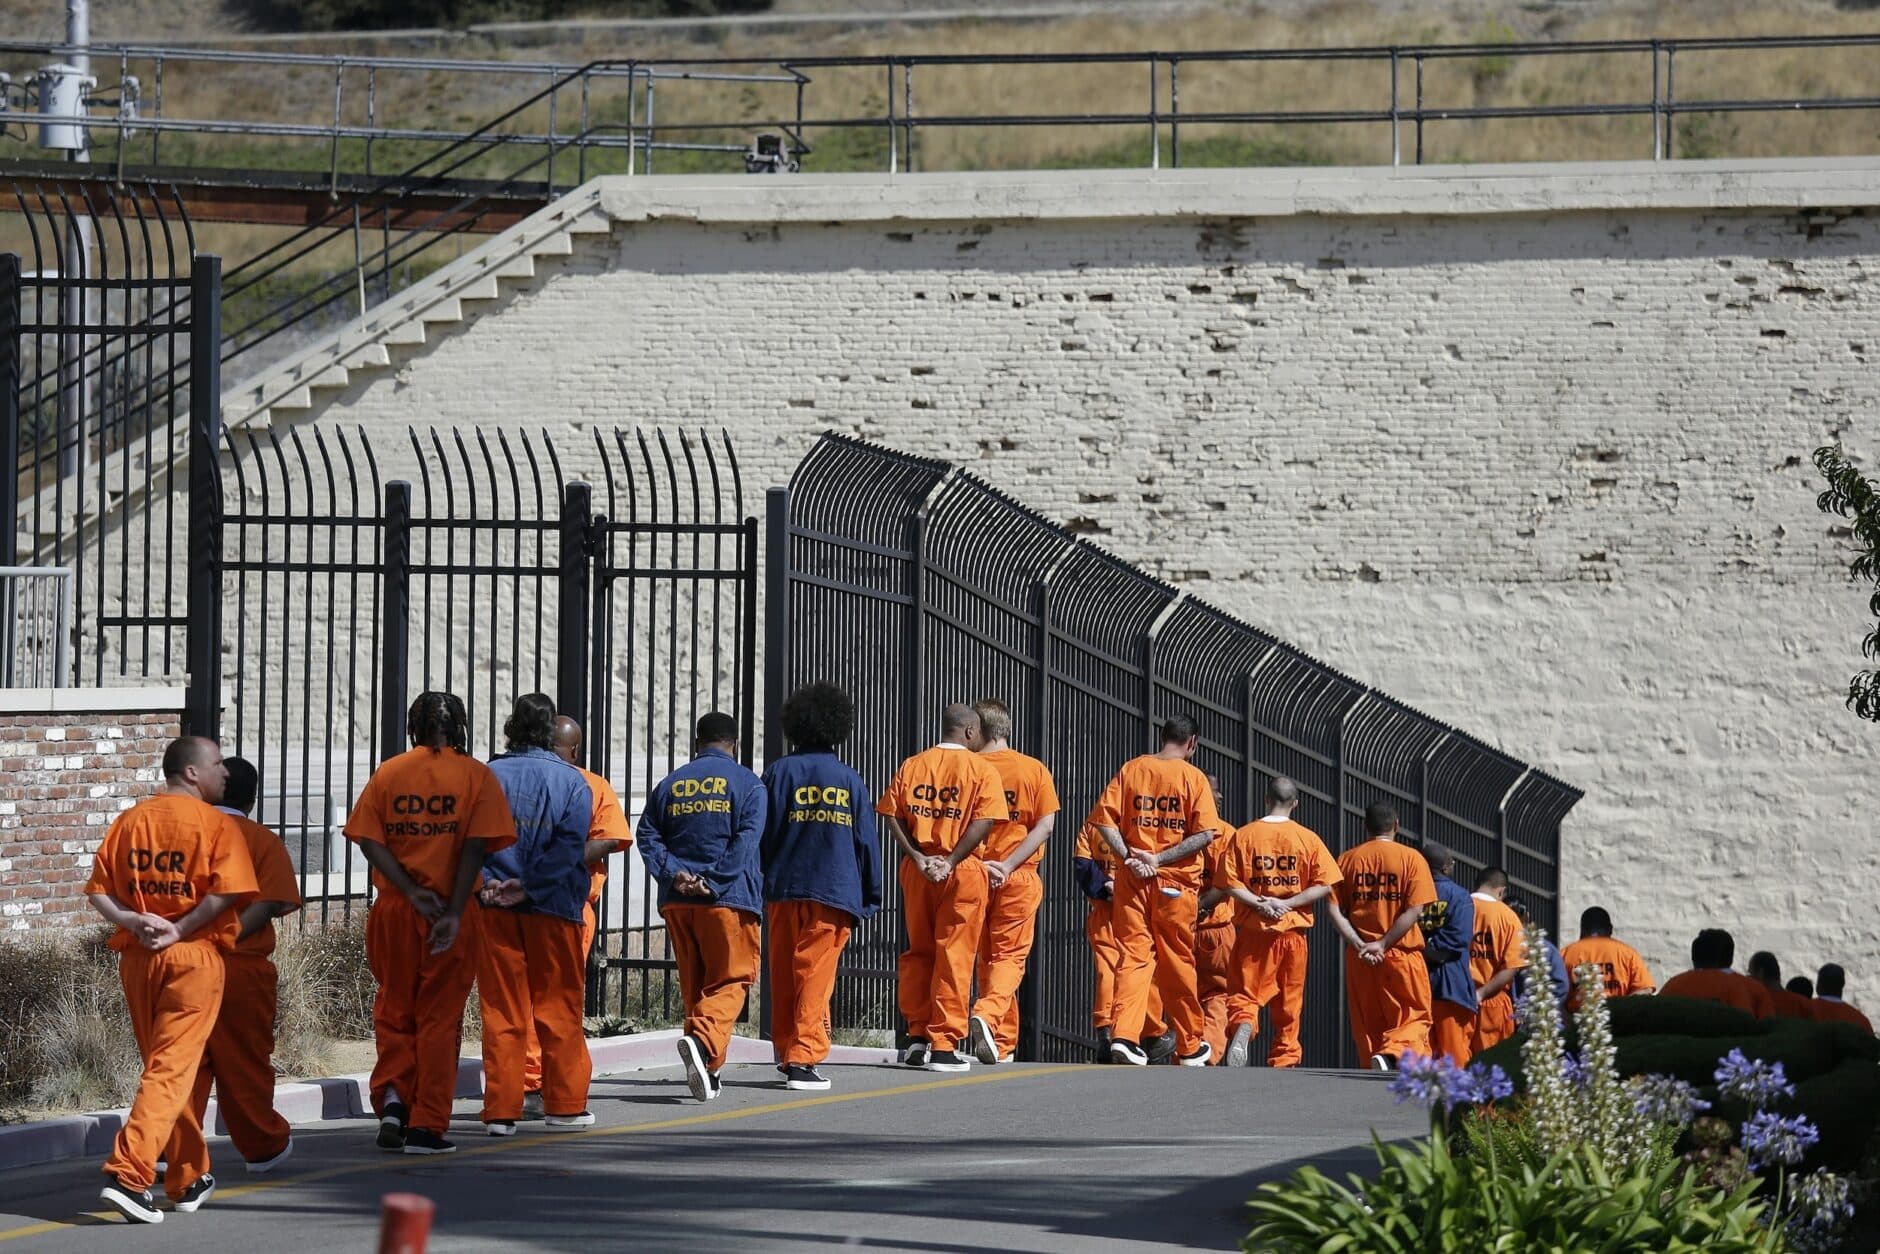 Telepsychiatry policy for California prisons is OK’d minus state’s